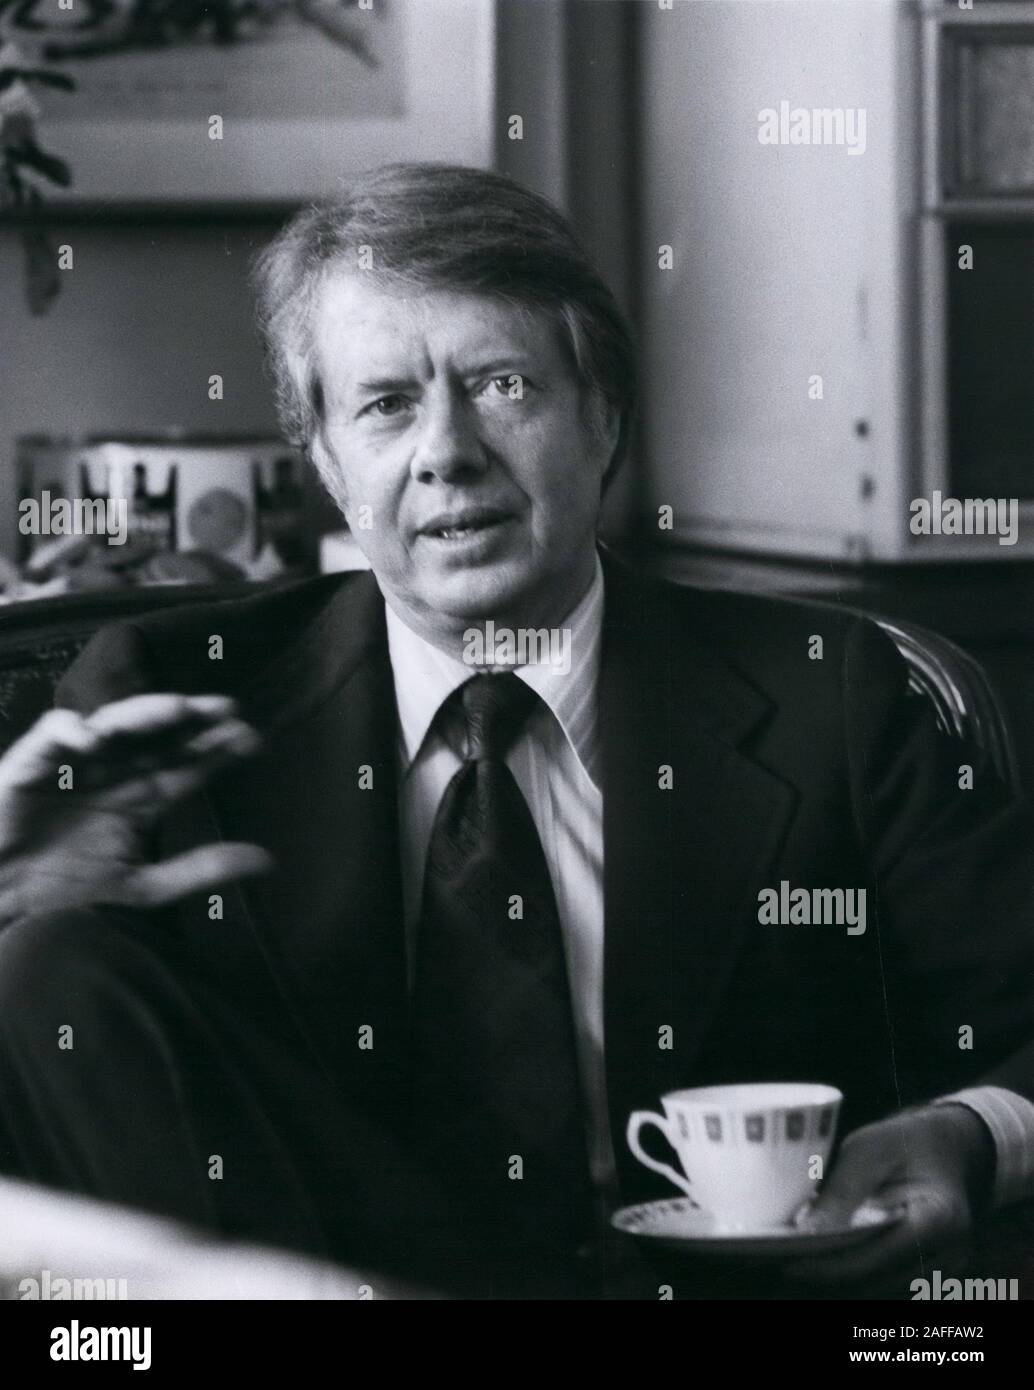 Usa. 03rd Mar, 1976. Presidential hopeful, Georgia Governor JIMMY CARTER holds a cup of tea or coffee. Exact place unknown. Credit: Keystone Pictures USA/ZUMAPRESS.com/Alamy Live News Stock Photo